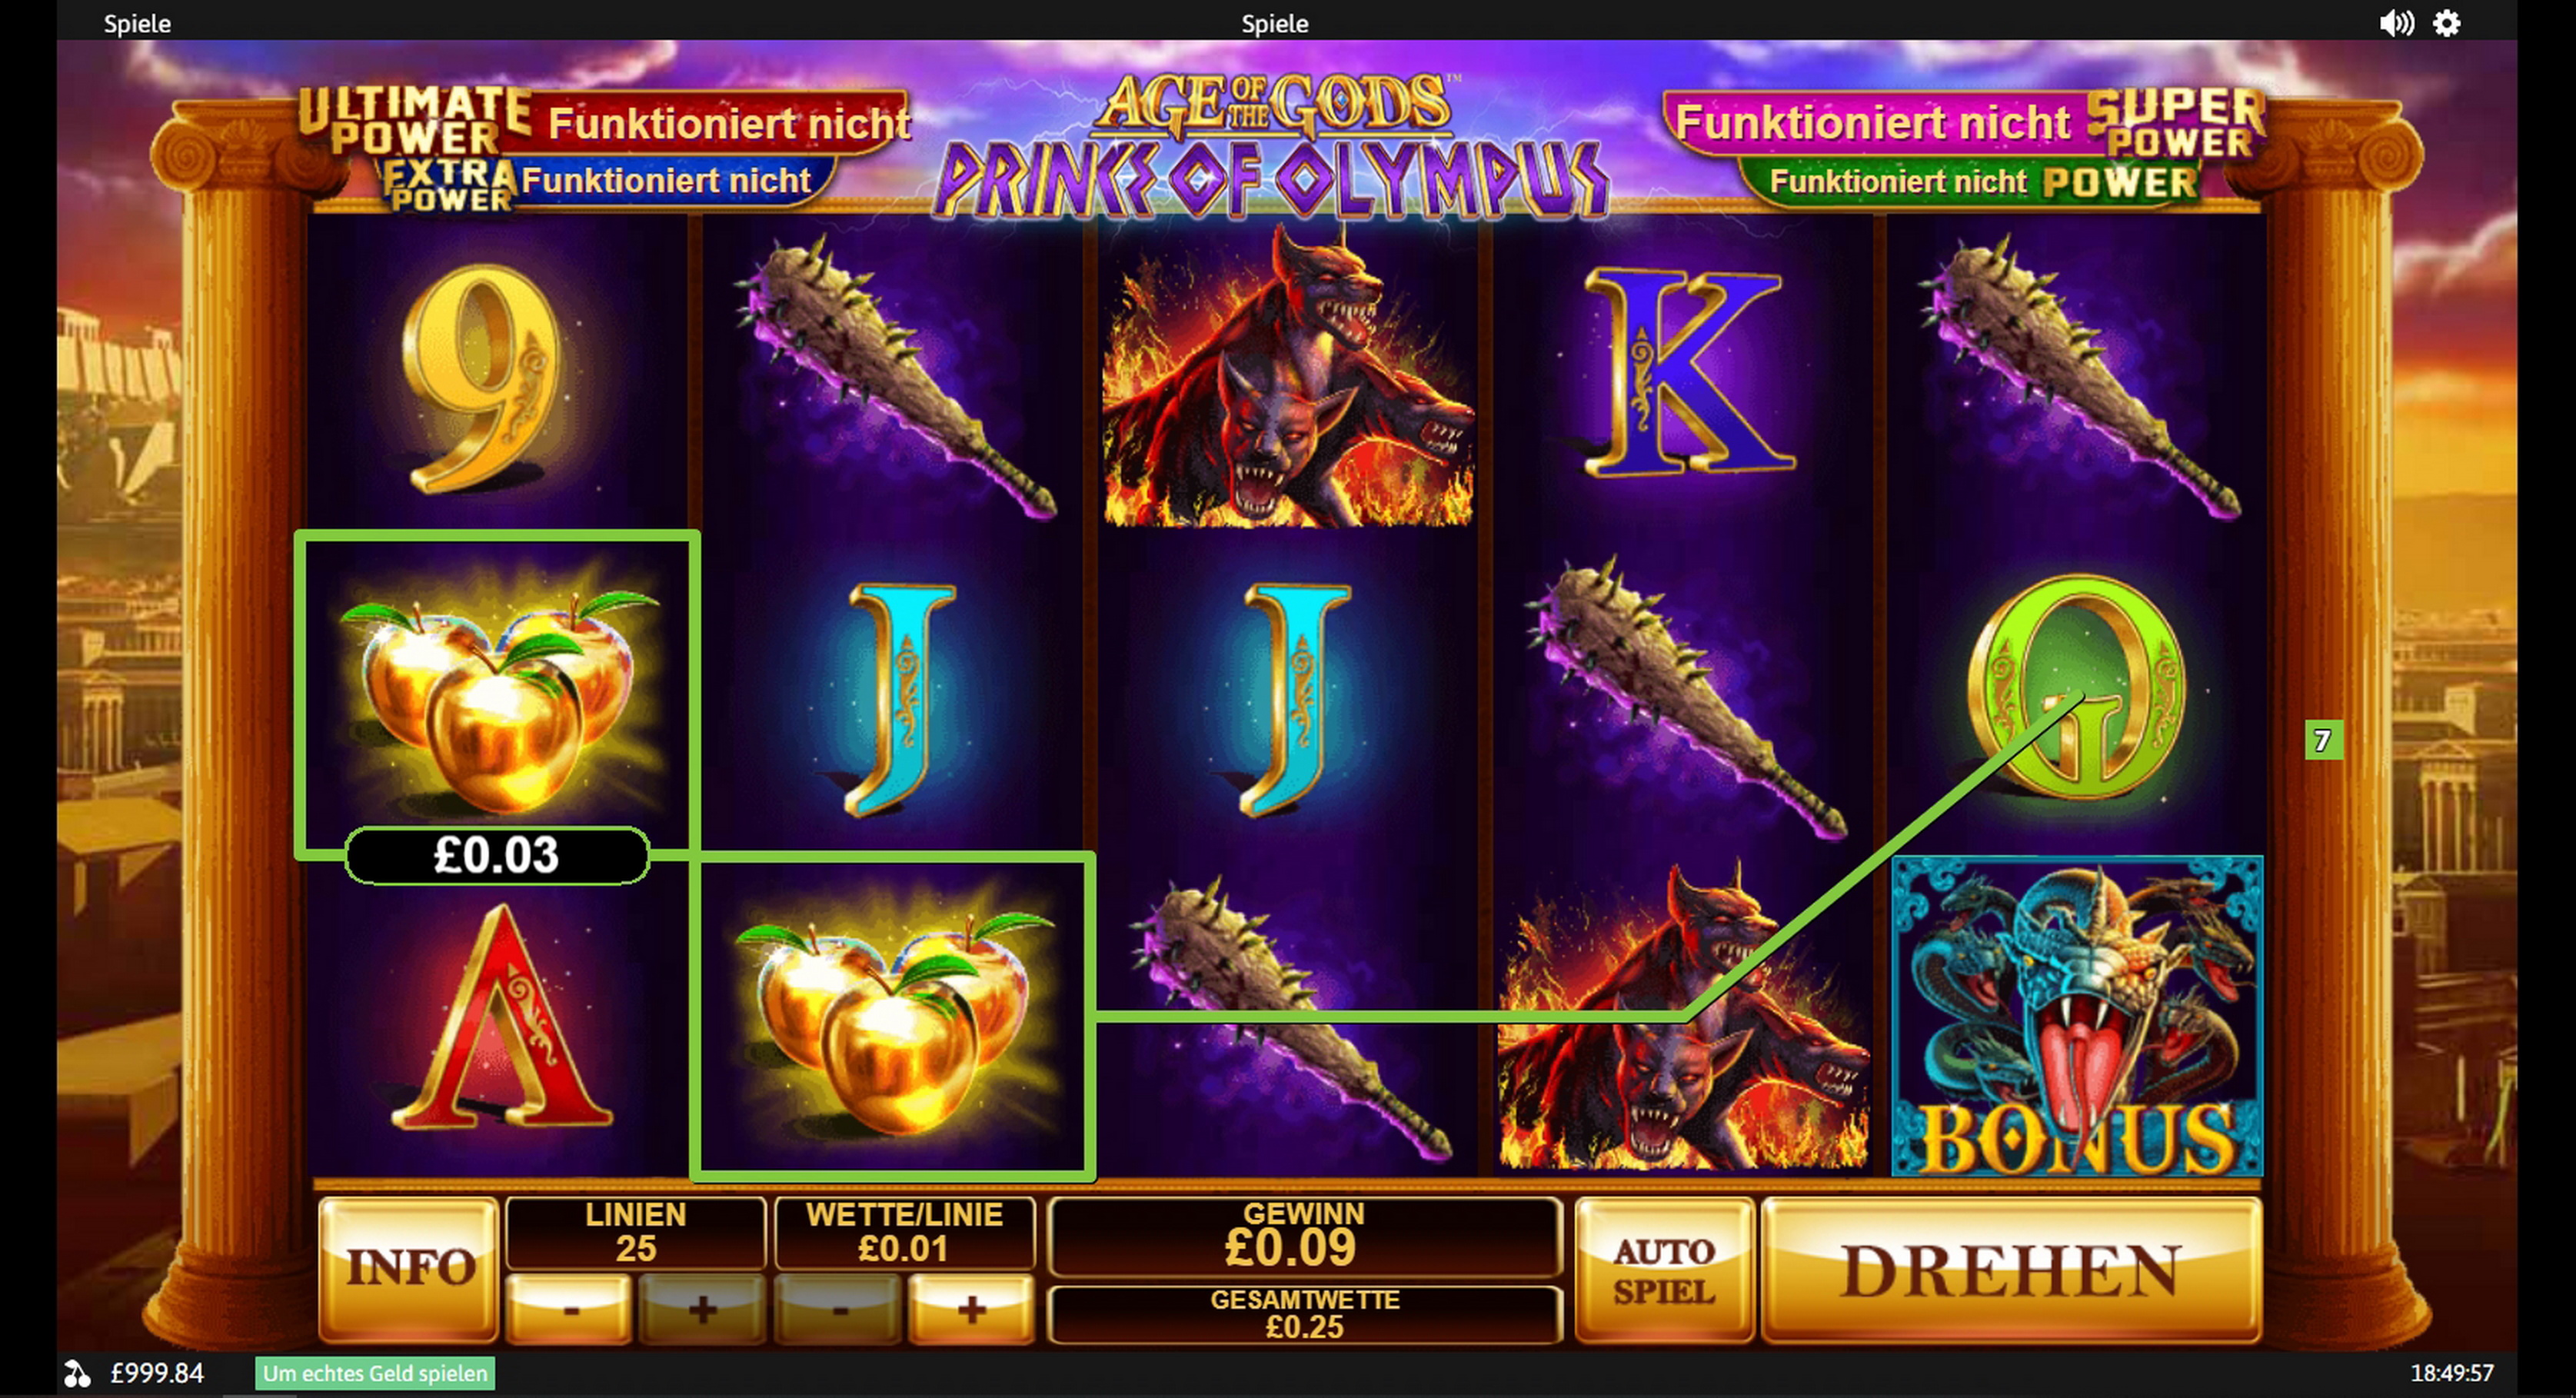 Win Money in Age of The Gods™ Prince of Olympus Free Slot Game by Playtech